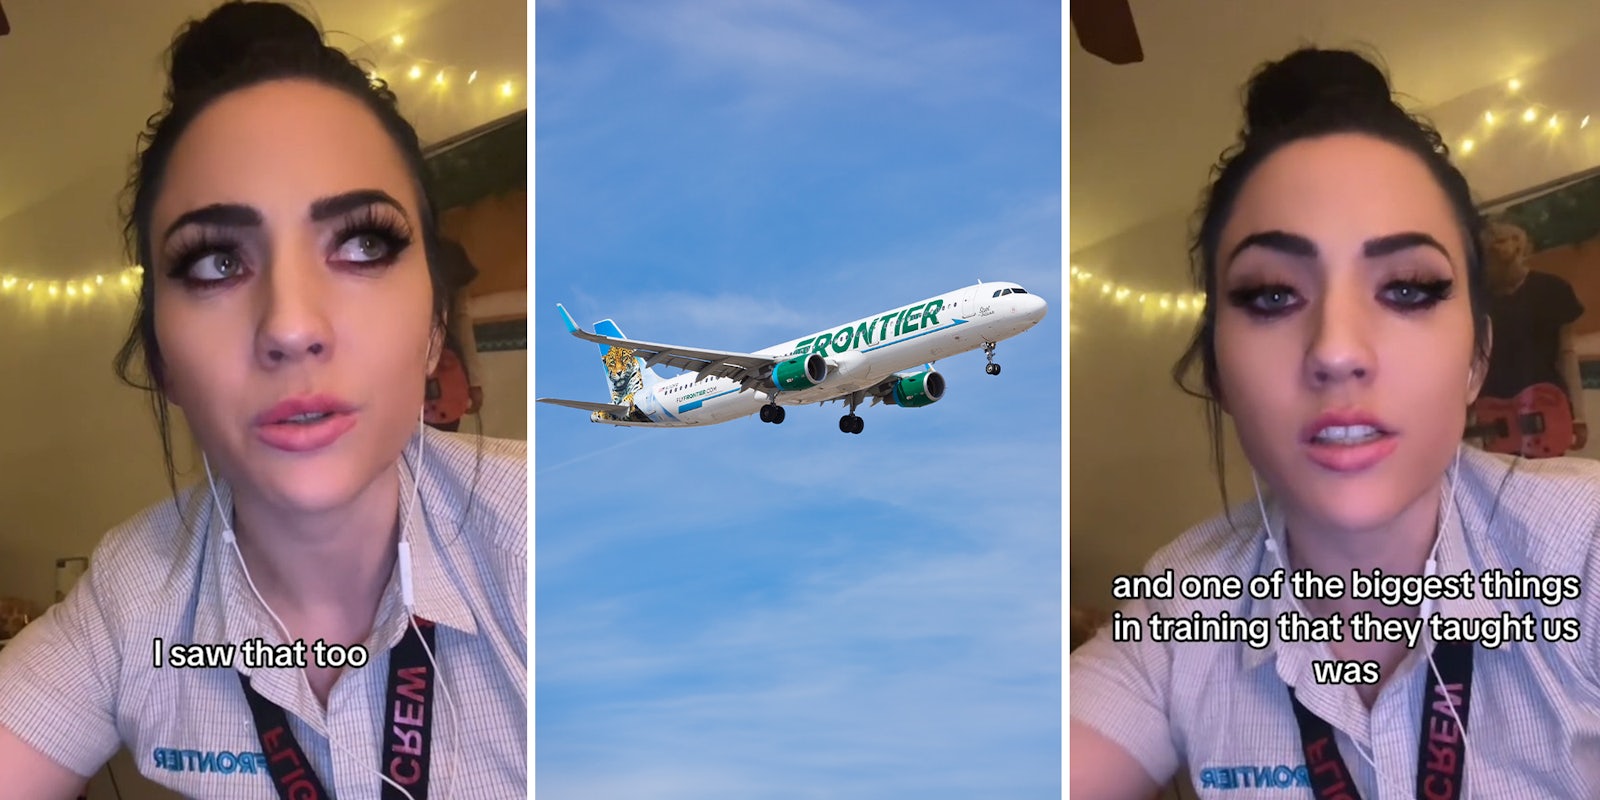 Frontier flight attendant says they're trained to spot human trafficking